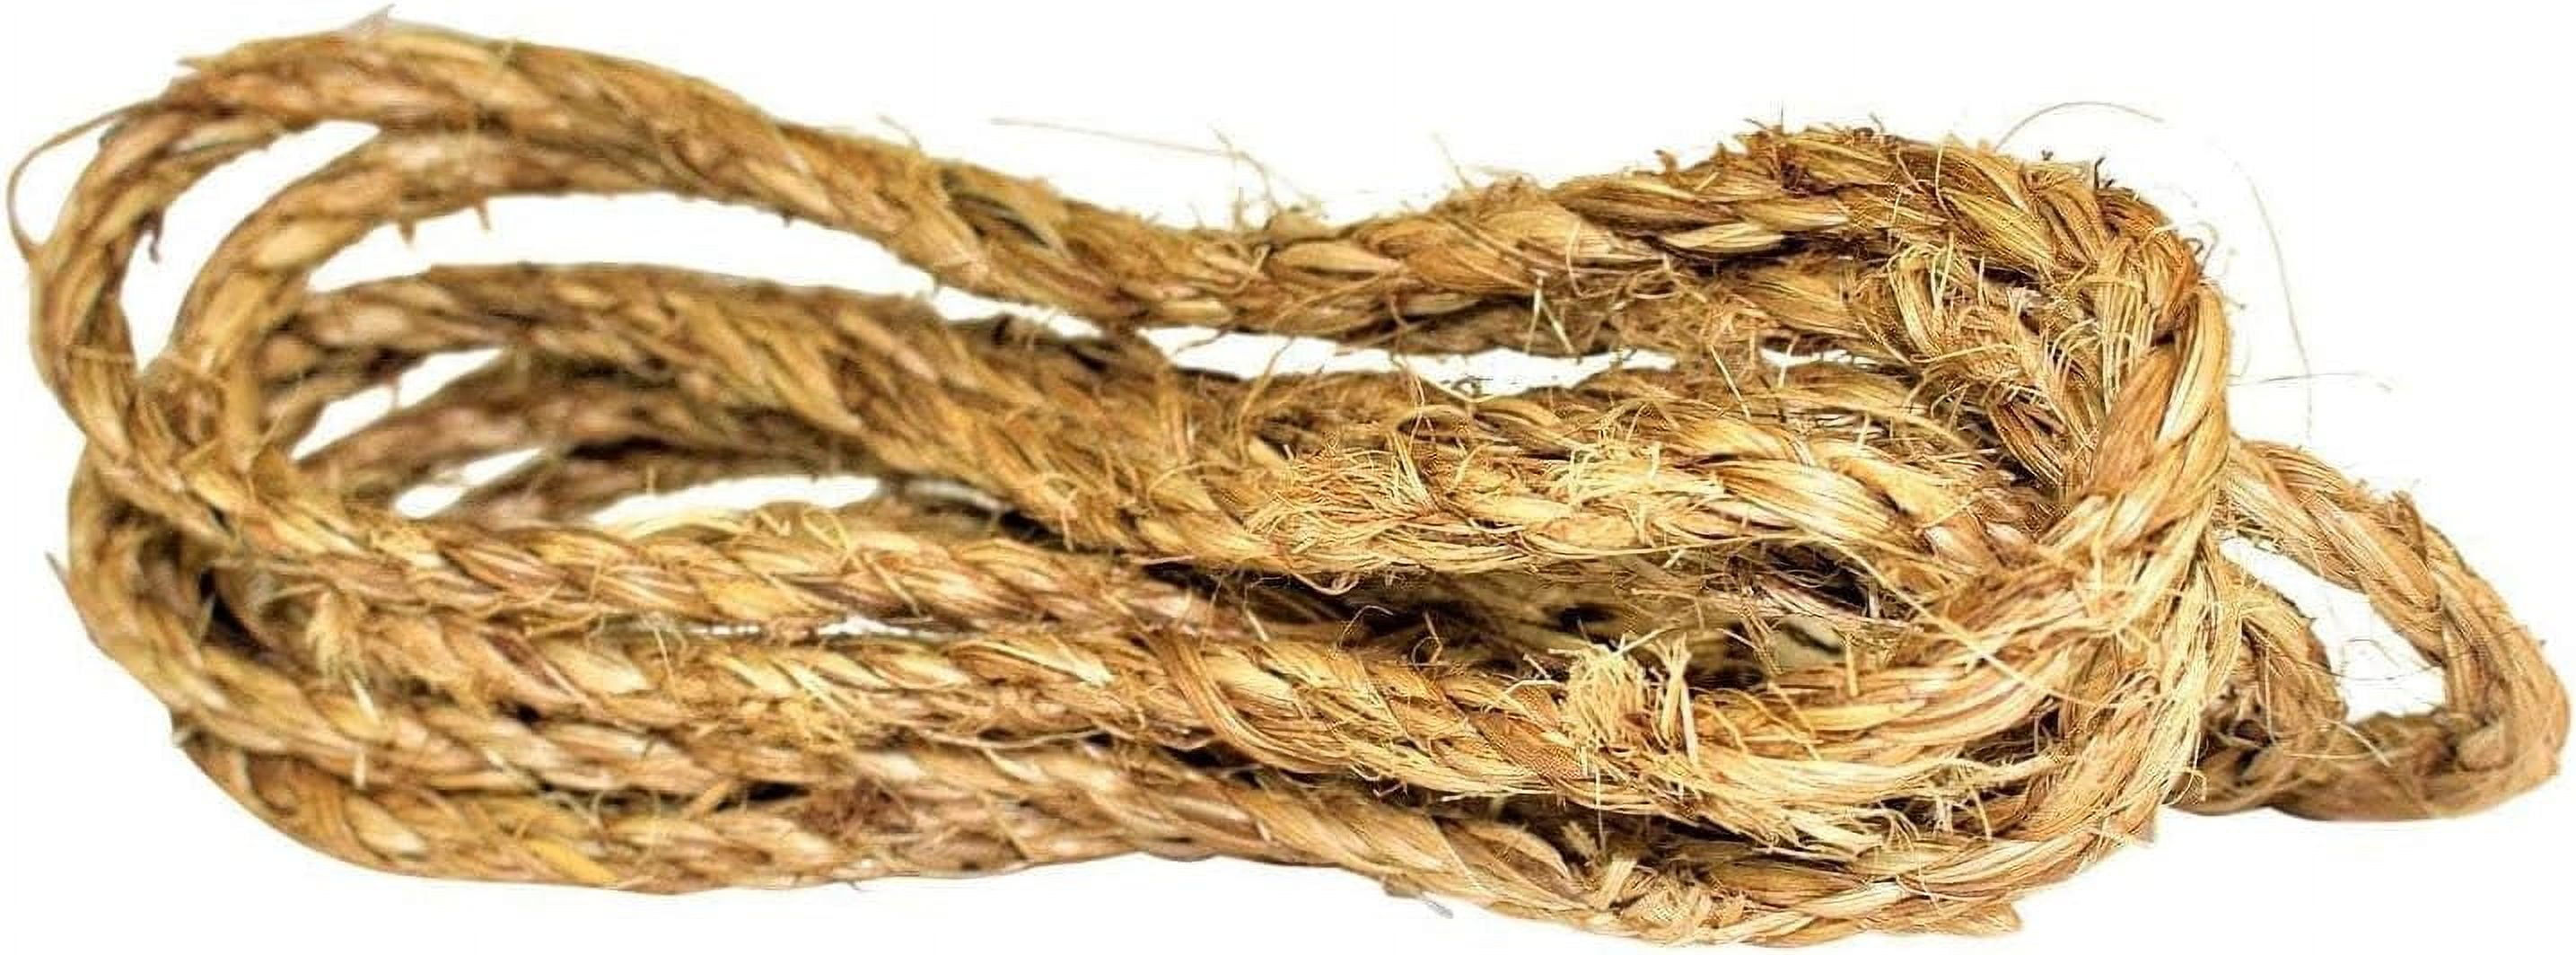 SGT KNOTS Twisted Jute Rope - Natural Fiber for India